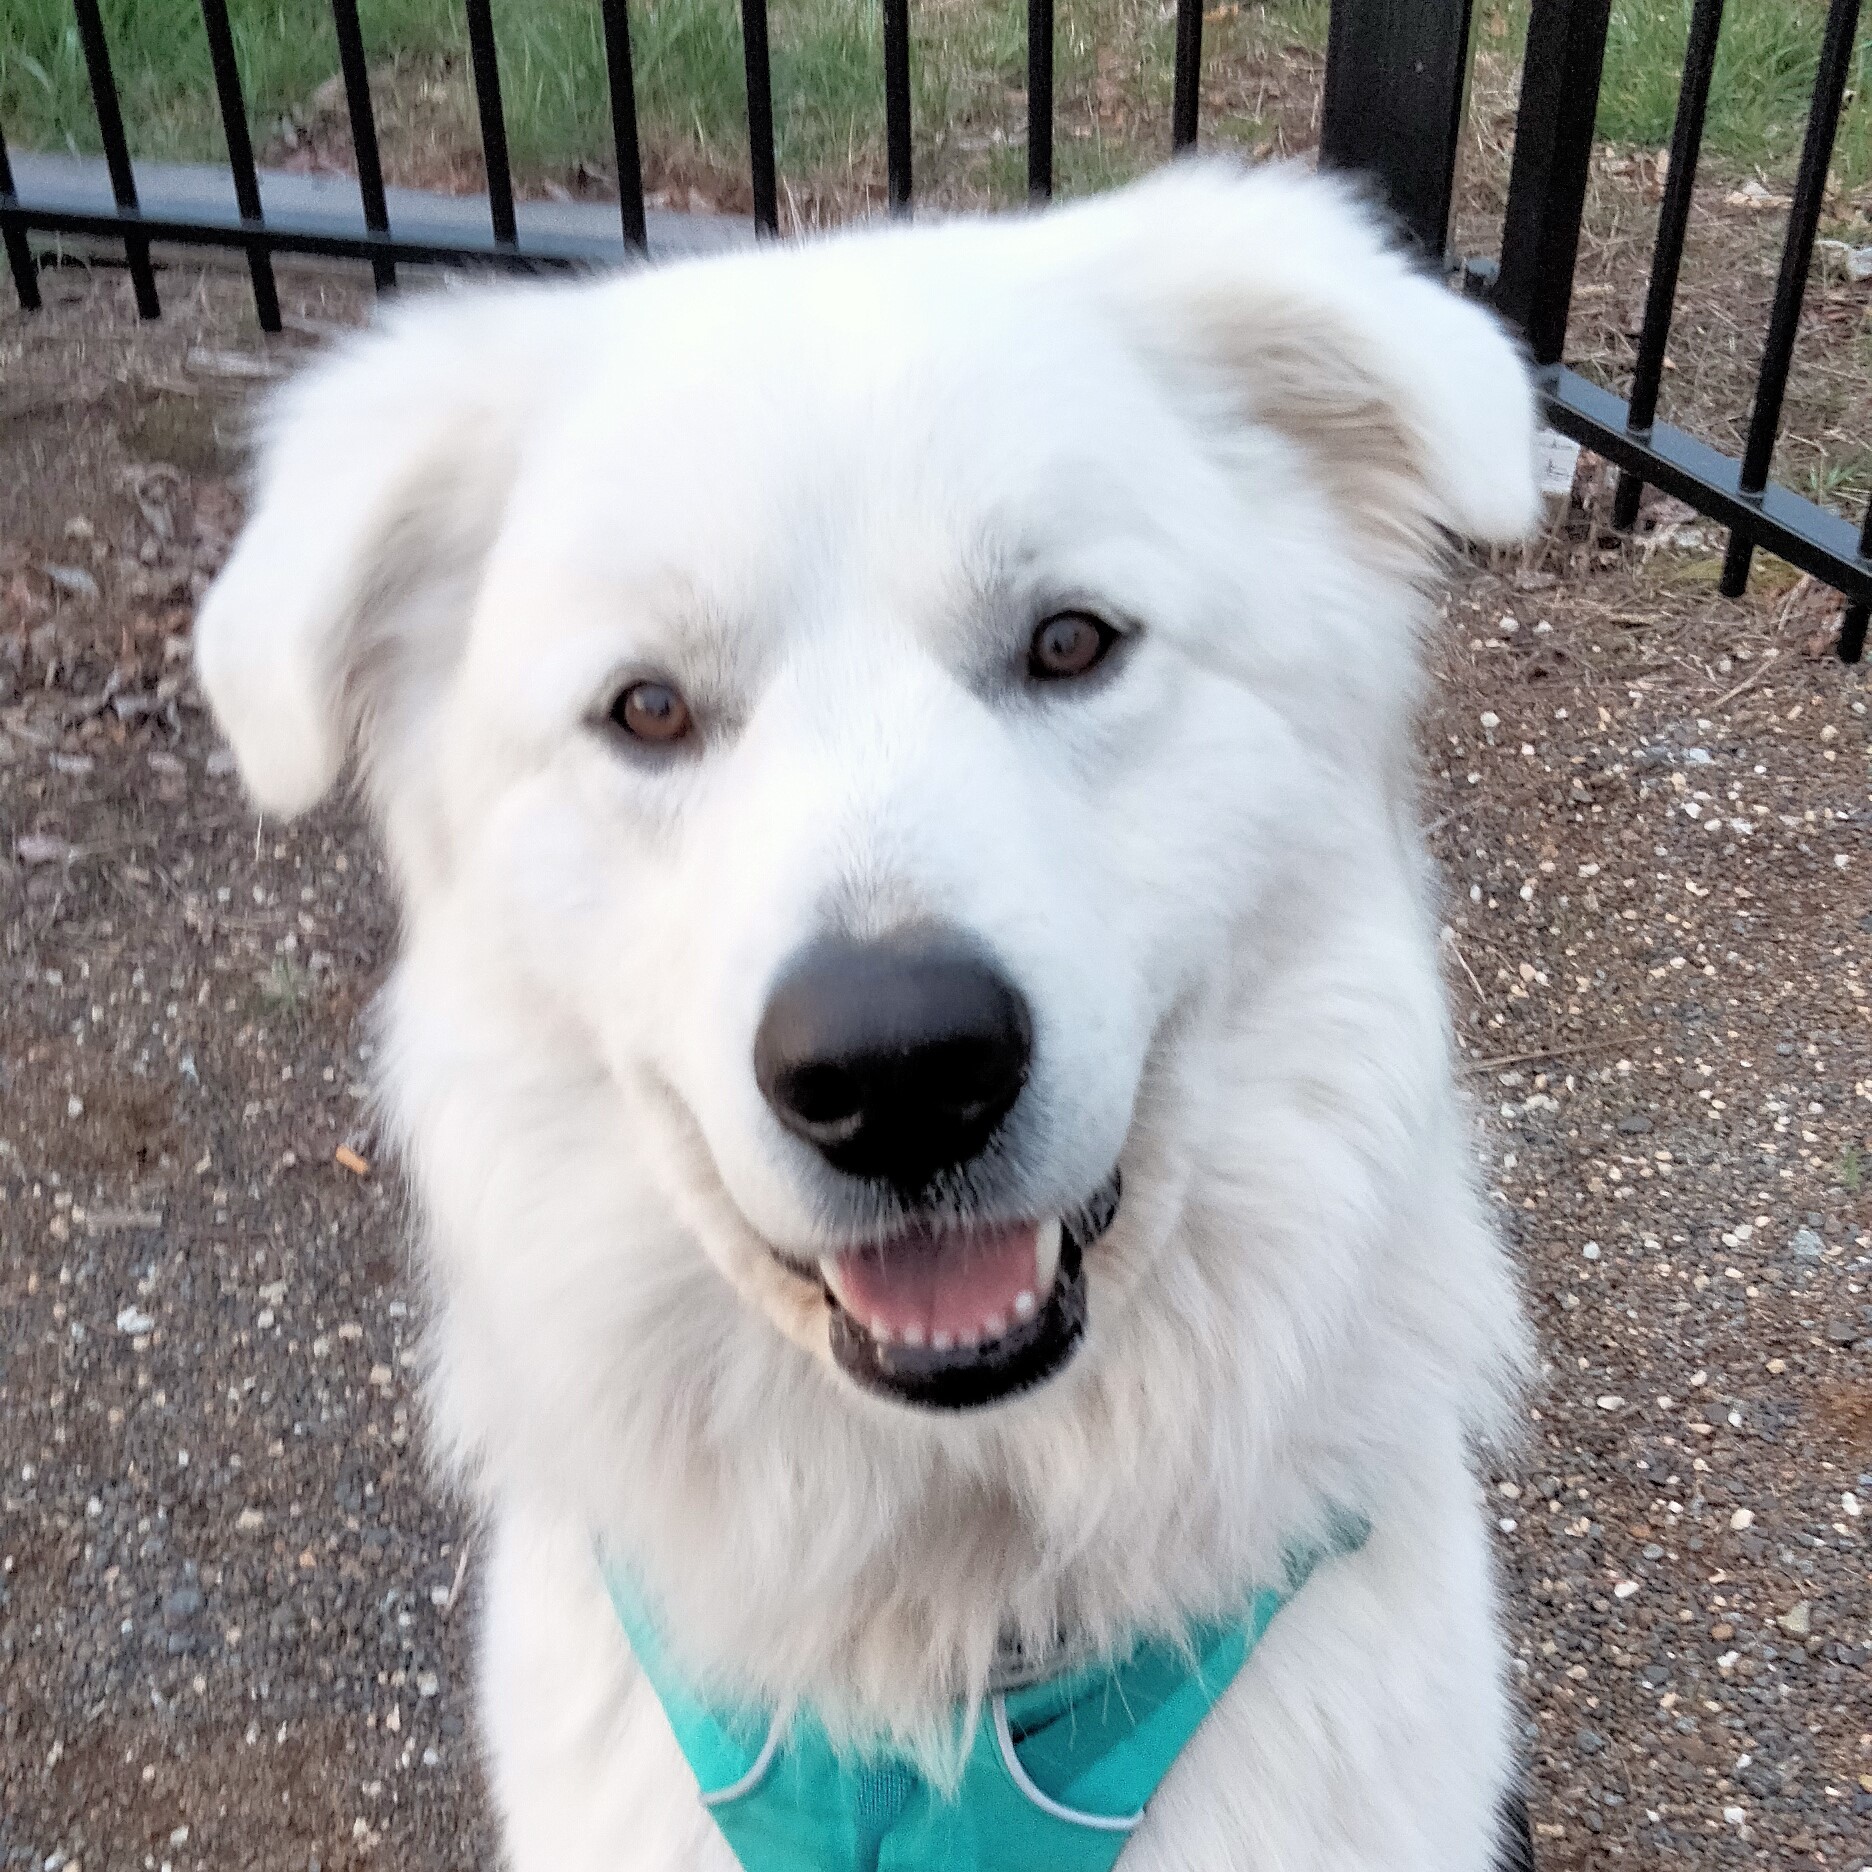 A white shepherd dog smiling at the camera.